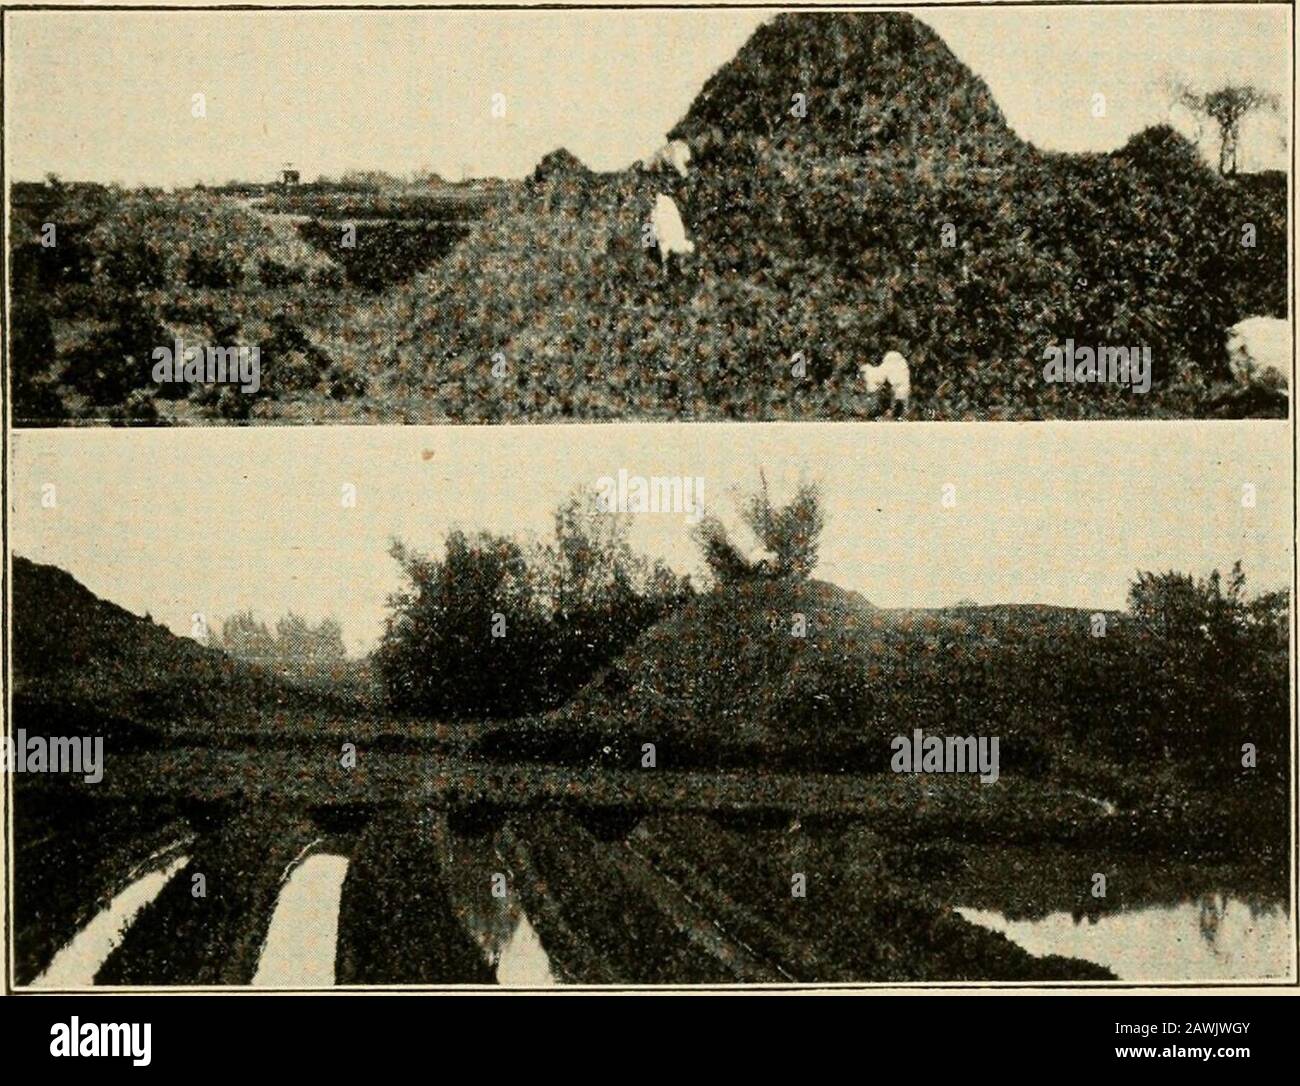 Farmers of forty centuries; or, Permanent agriculture in China, Korea and Japan . ter part of thetime, and we wonder if the fact does not also record a slow sub-sidence of the delta plain under the ever-increasing load ofriver silt. A closer view of the graves is given in the lower section ofFig. 20, where they are seen not only to occupy large areas ofvaluable land but to be much in the way of agricultural opera-tions. A still closer view of other groups, with a farm village inthe background, is shown in the middle section of the sameillustration. On the right may be seen a line of six graves Stock Photo